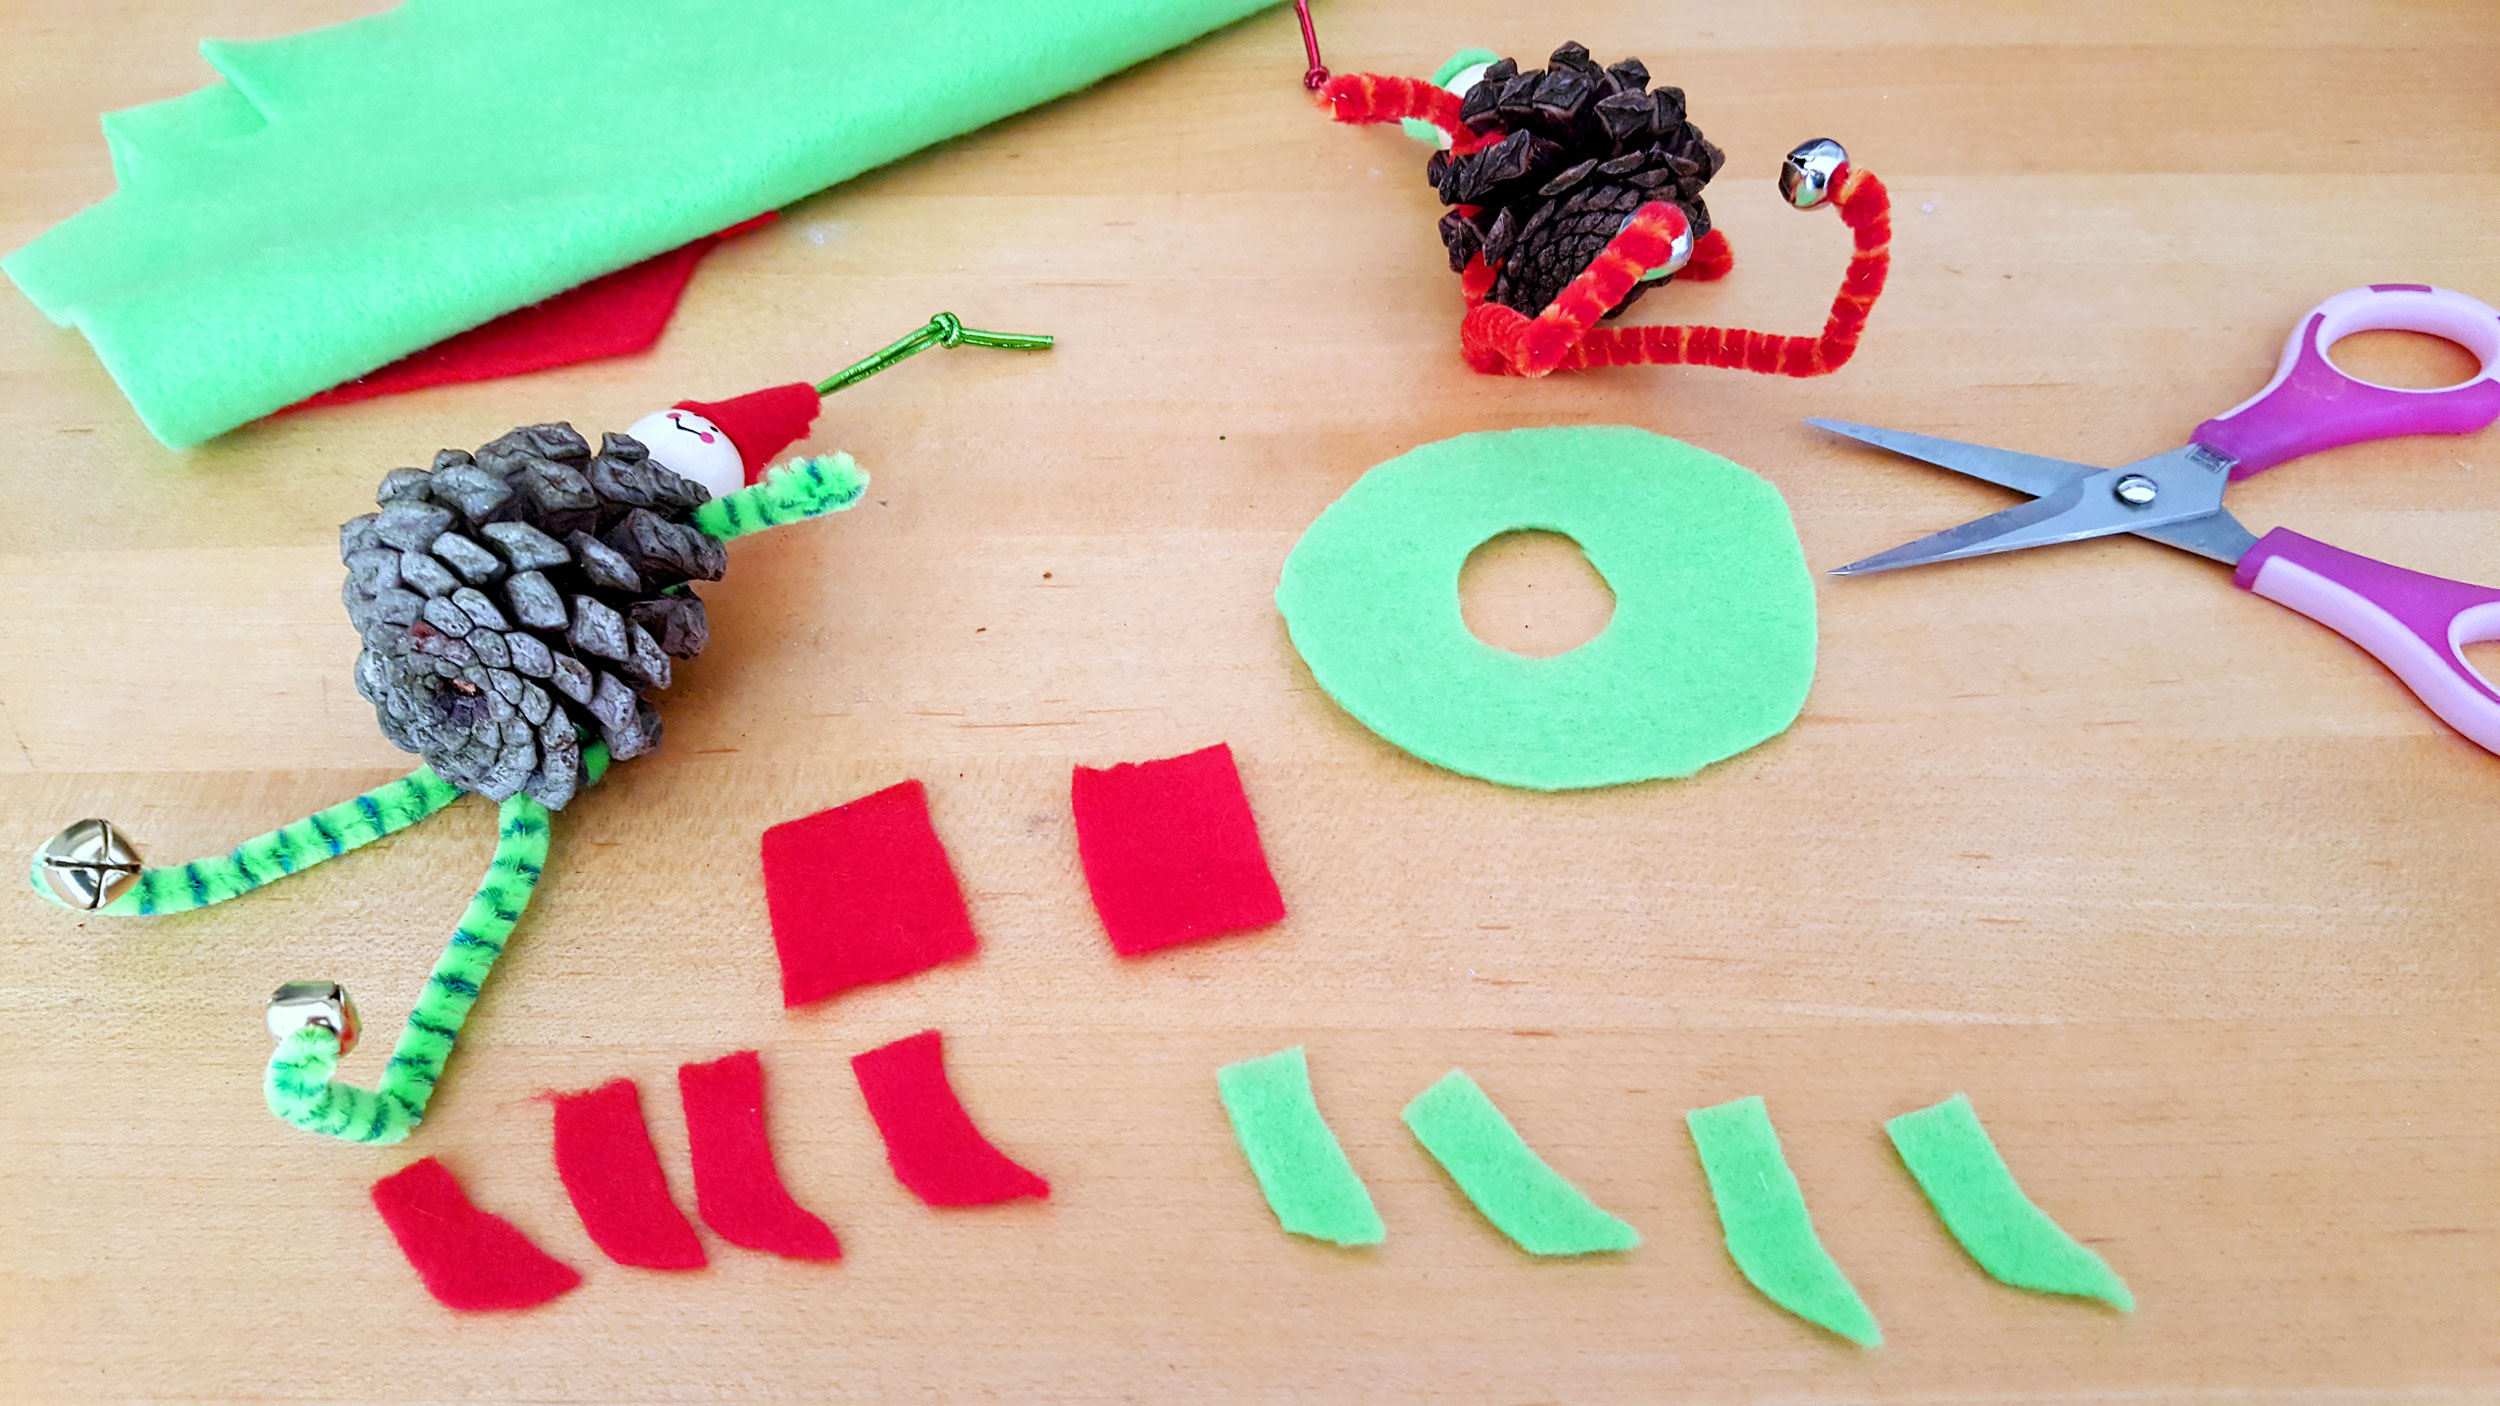 Pine Cone Elf Ornaments Step 6: Pipe cleaner clothes for Elf ornaments. | OrnamentShop.com